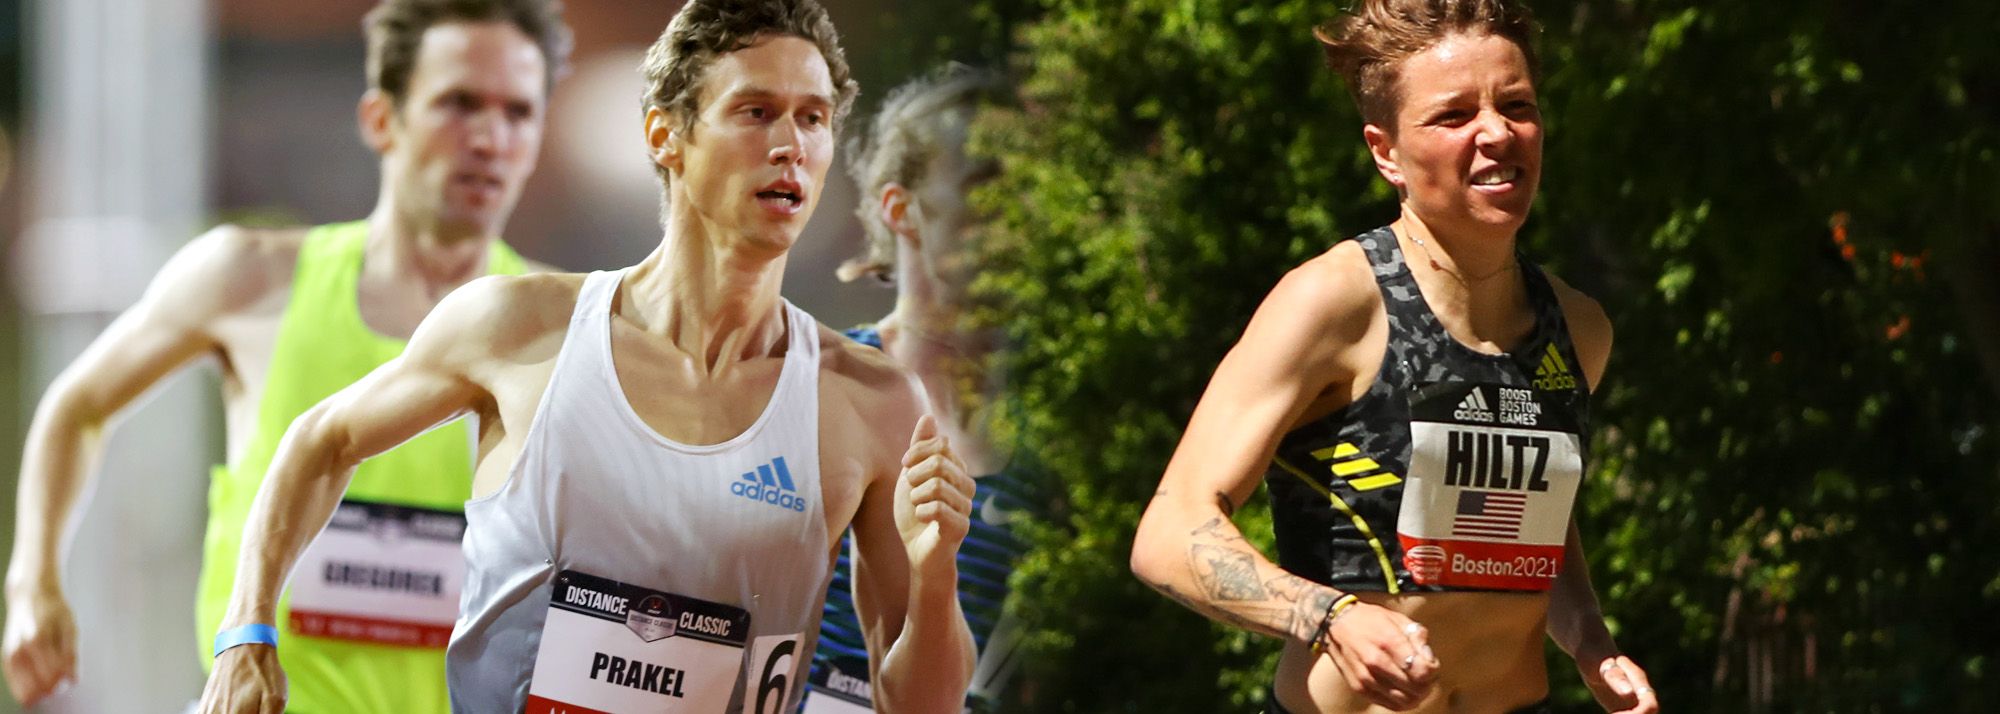 The winning times from this year’s US Road Mile Championships – 4:27.97 for Nikki Hiltz and 4:01.21 for Sam Prakel – have been ratified as the inaugural world records for the road mile